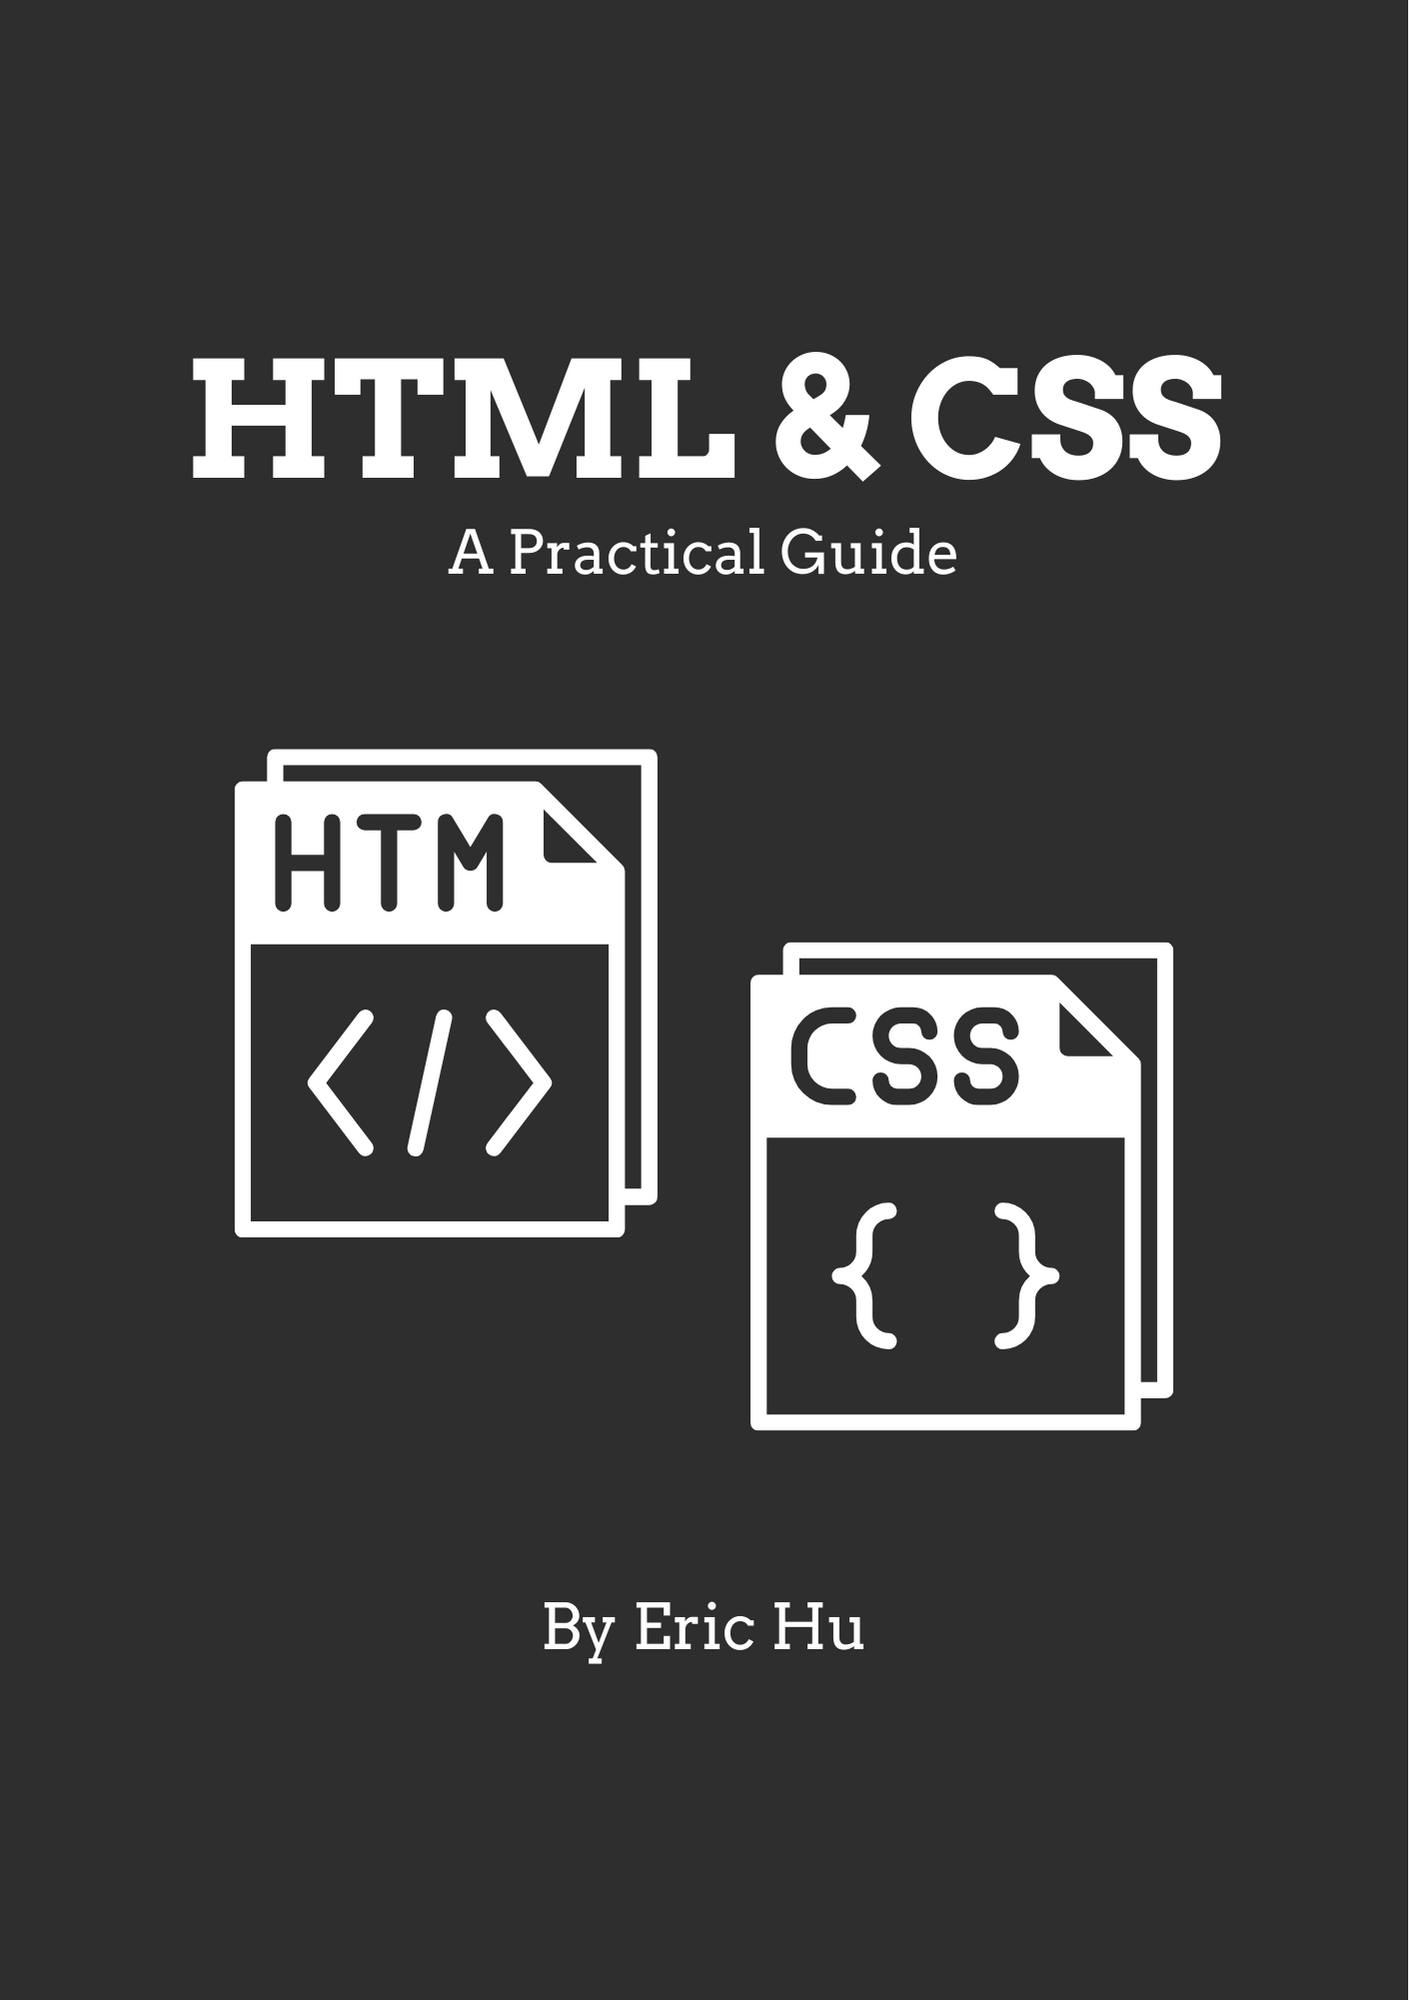 HTML & CSS: A Practical Guide